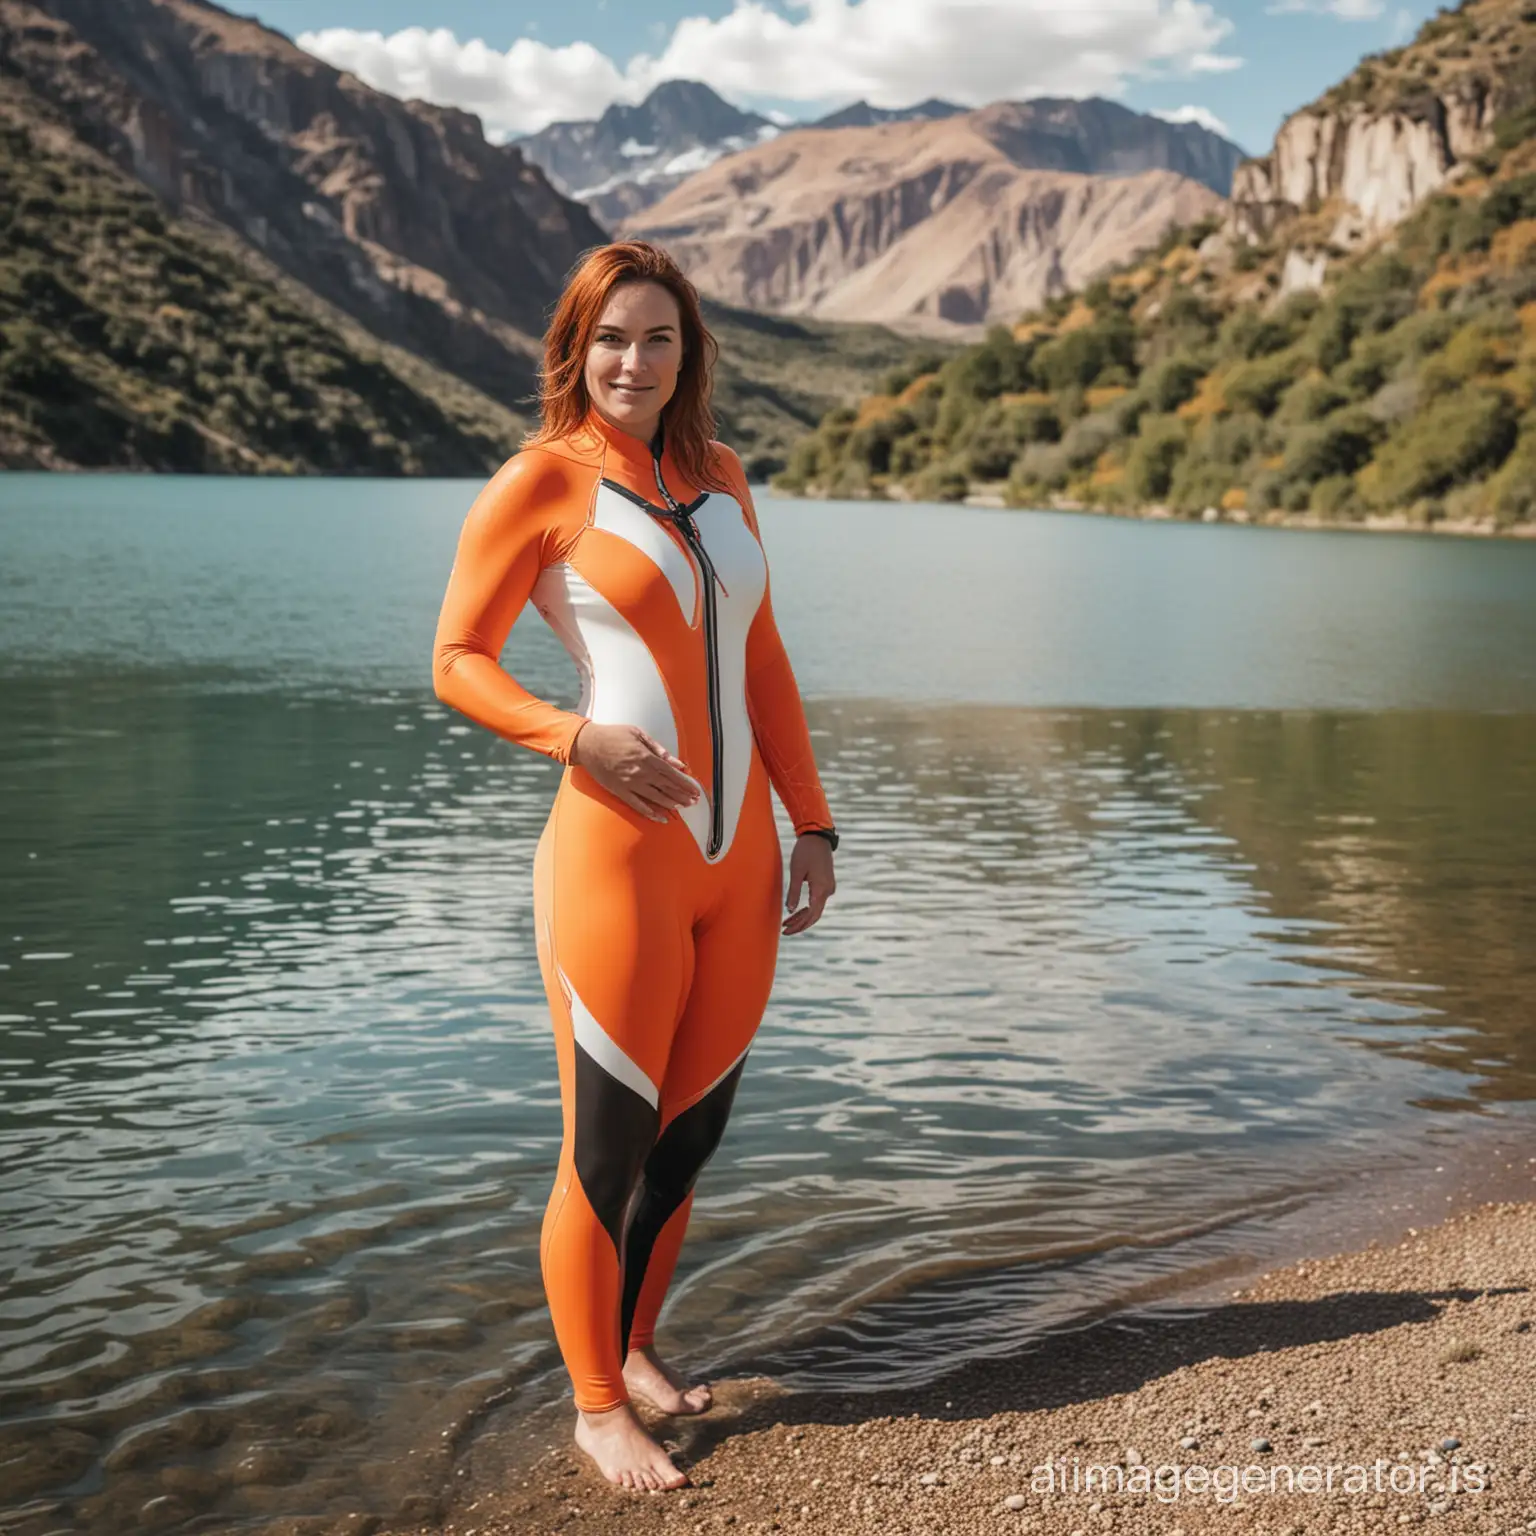 fourty years old curvy auburn woman in orange white body wetsuit by a fabolous lake at daylight, lake is surrounded by patagonia hills